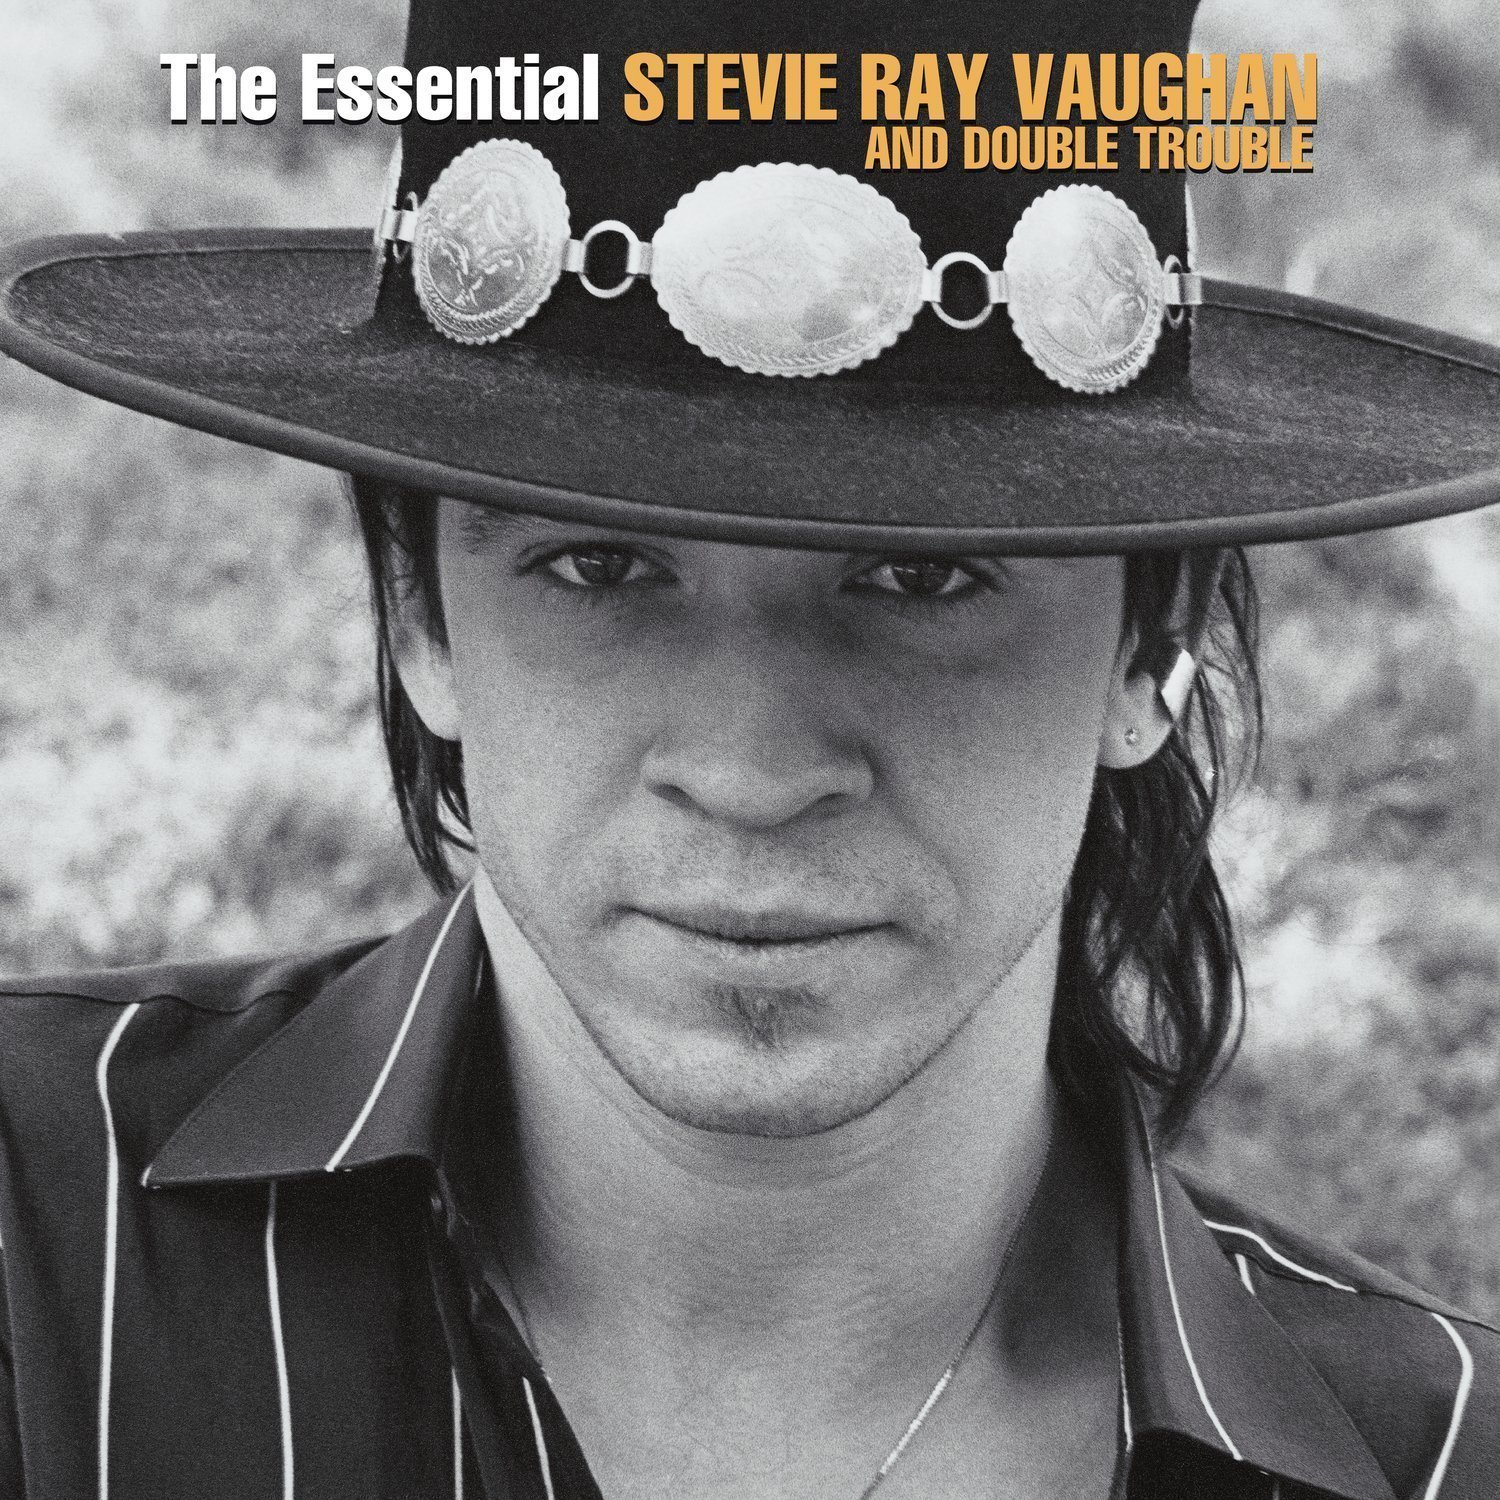 Vinyl Record Stevie Ray Vaughan Essential Stevie Ray Vaughan & Double Trouble (2 LP)